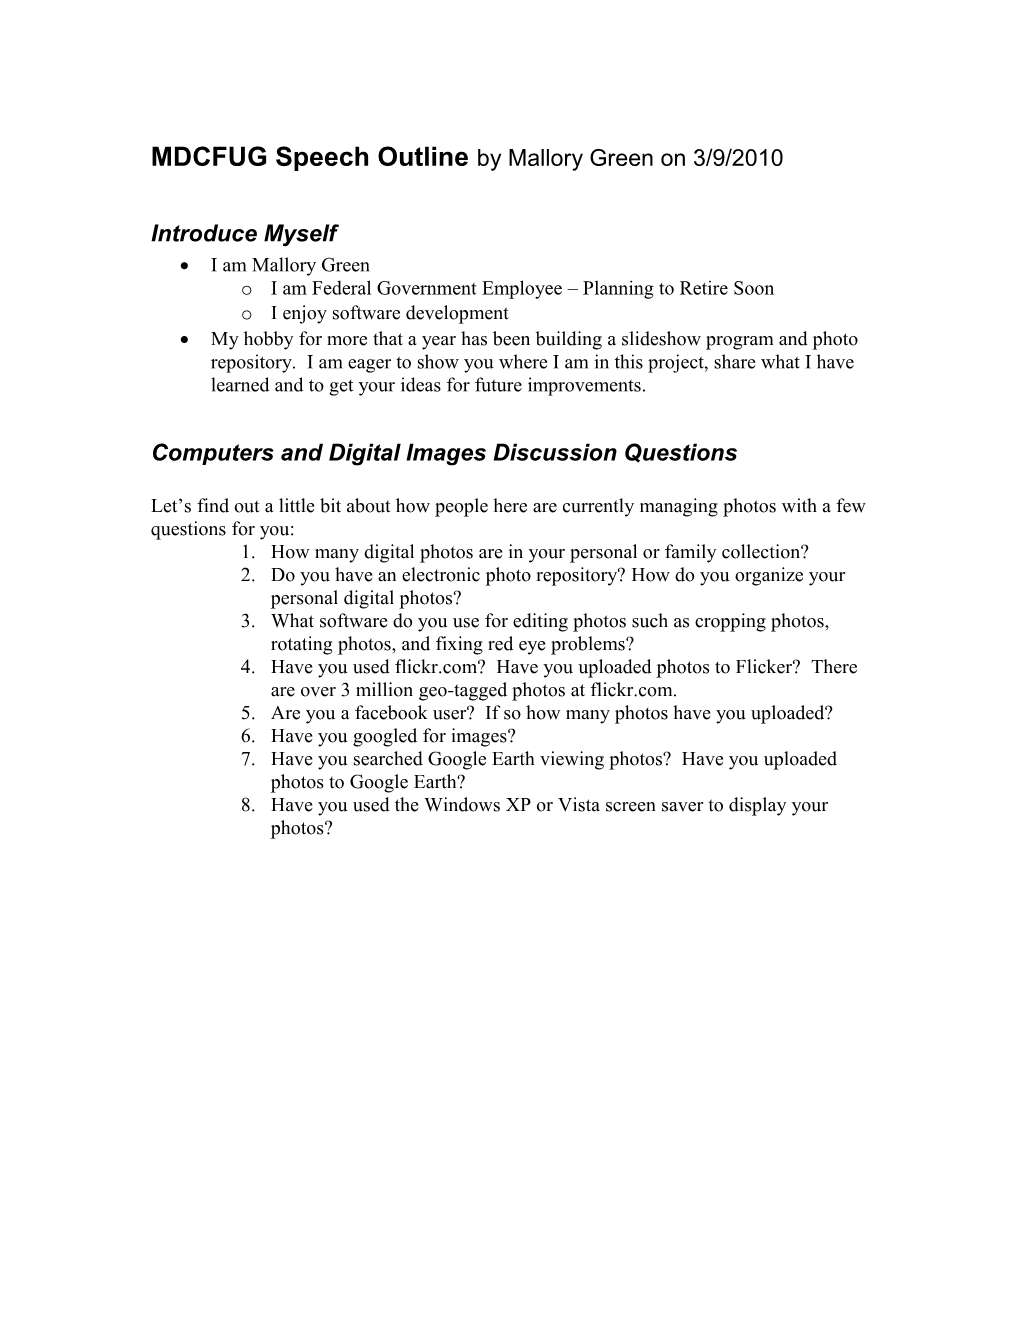 MDCFUG Speech Outline by Mallory Green on 3/9/2010